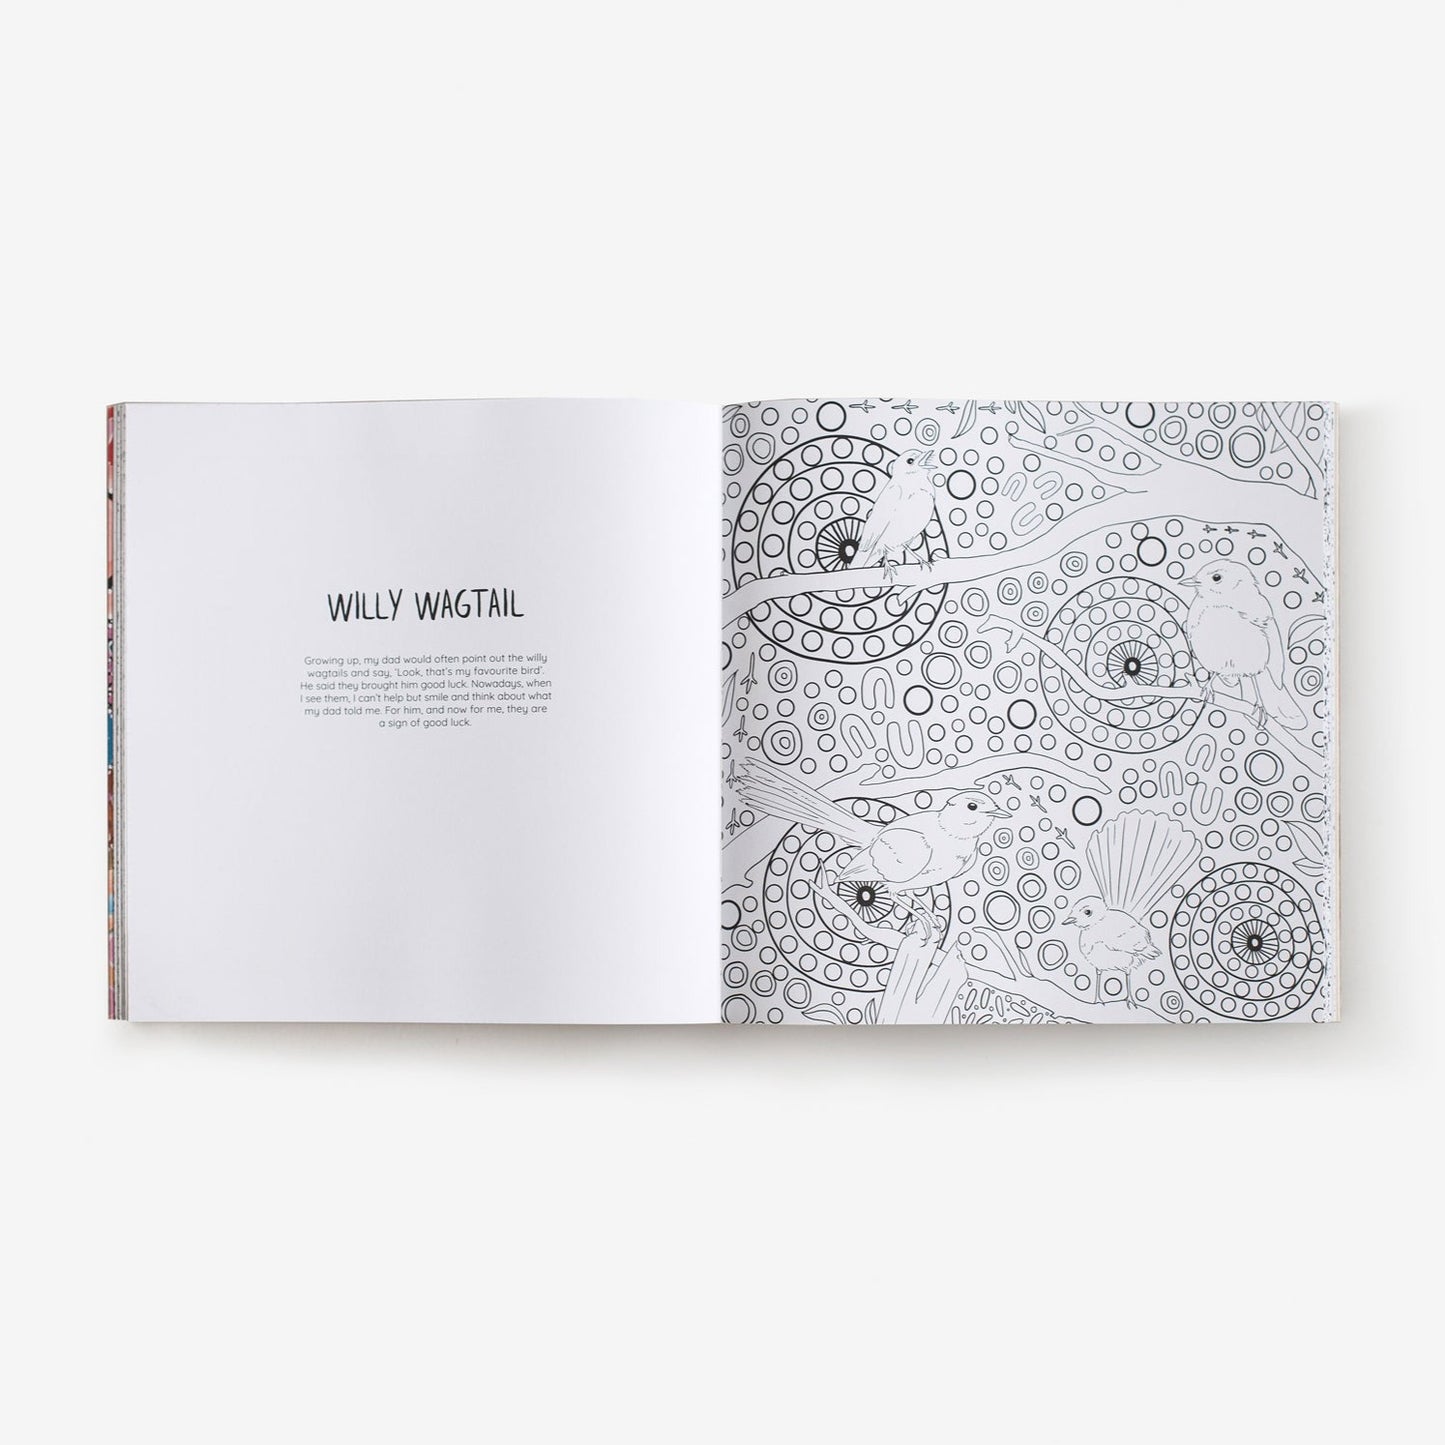 BOOKS & CO - Mulganai: A First Nations Colouring Book By Emma Hollingsworth